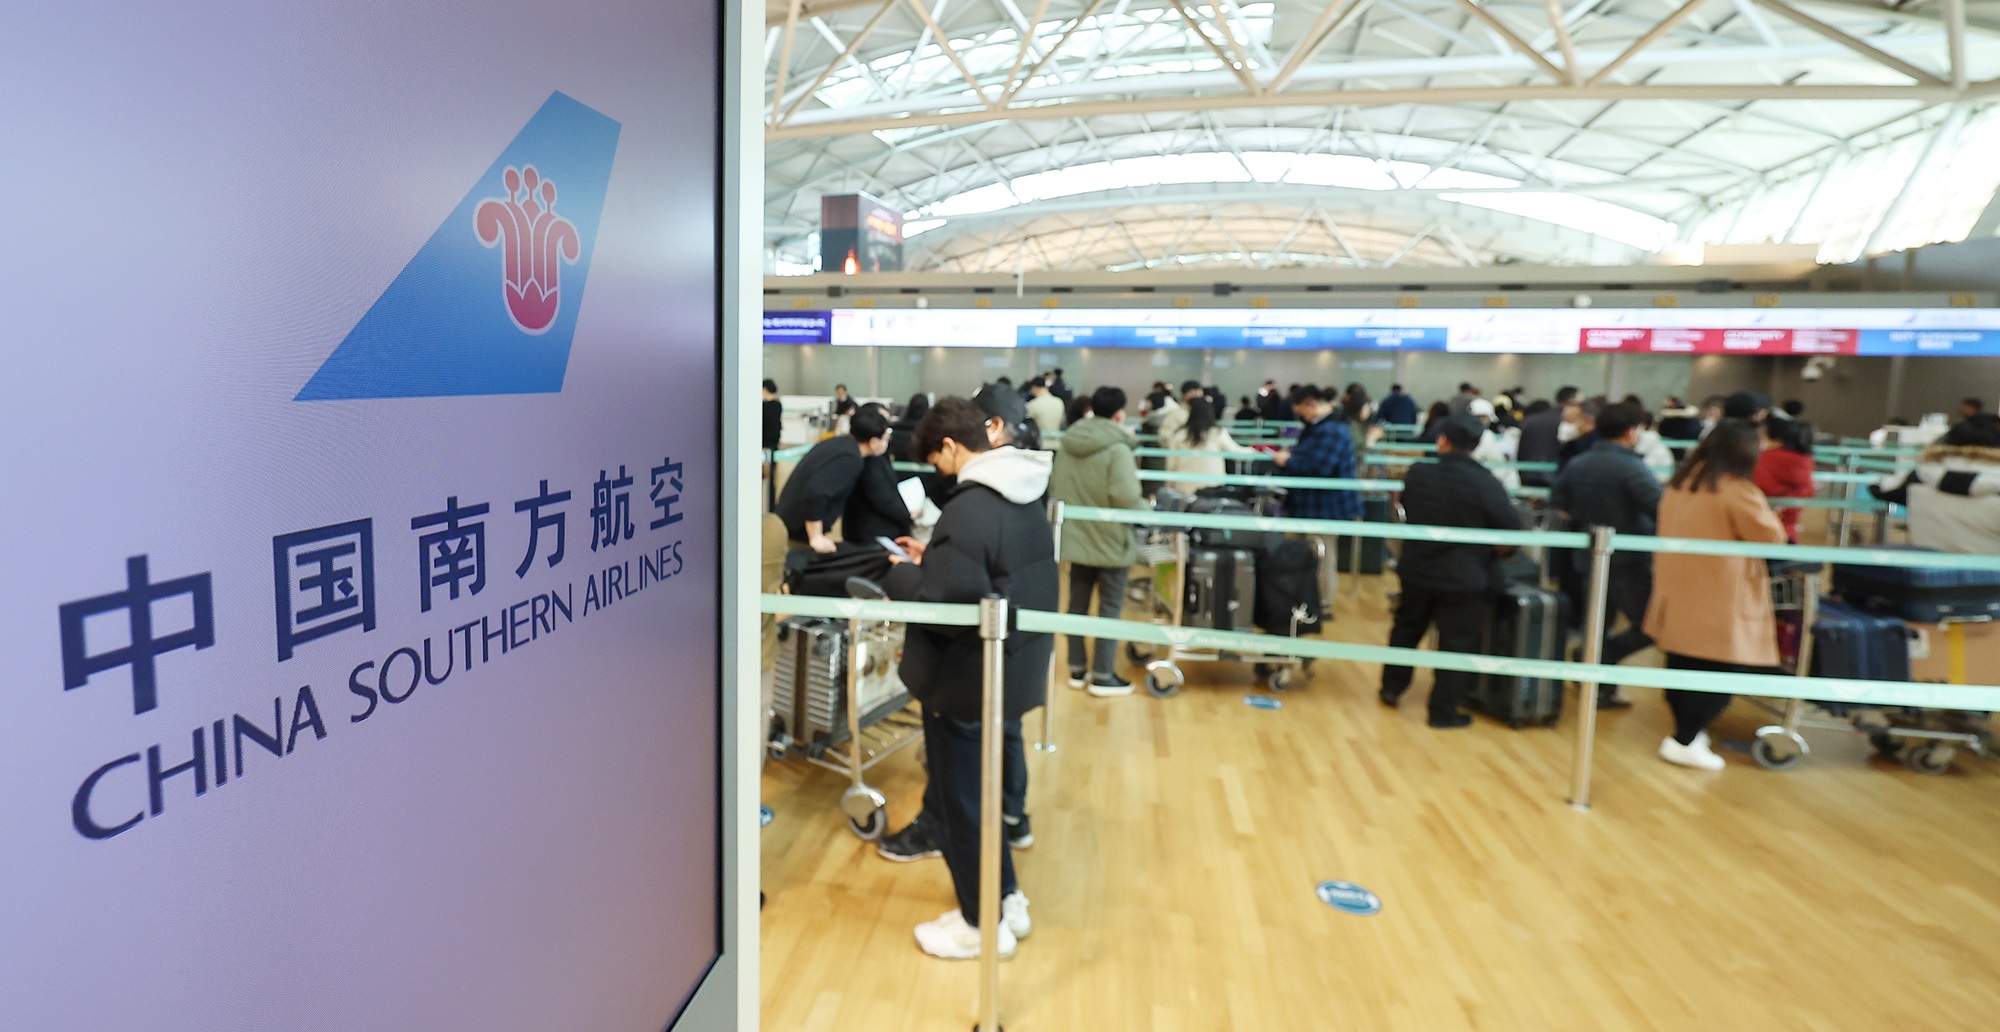 From March 1, the mandatory PCR test on arrival for incoming travelers from China will be lifted. Shown is a group of passengers waiting for the boarding process to depart for China in the departures section of Incheon International Airport's Terminal 1. (Yonhap News)